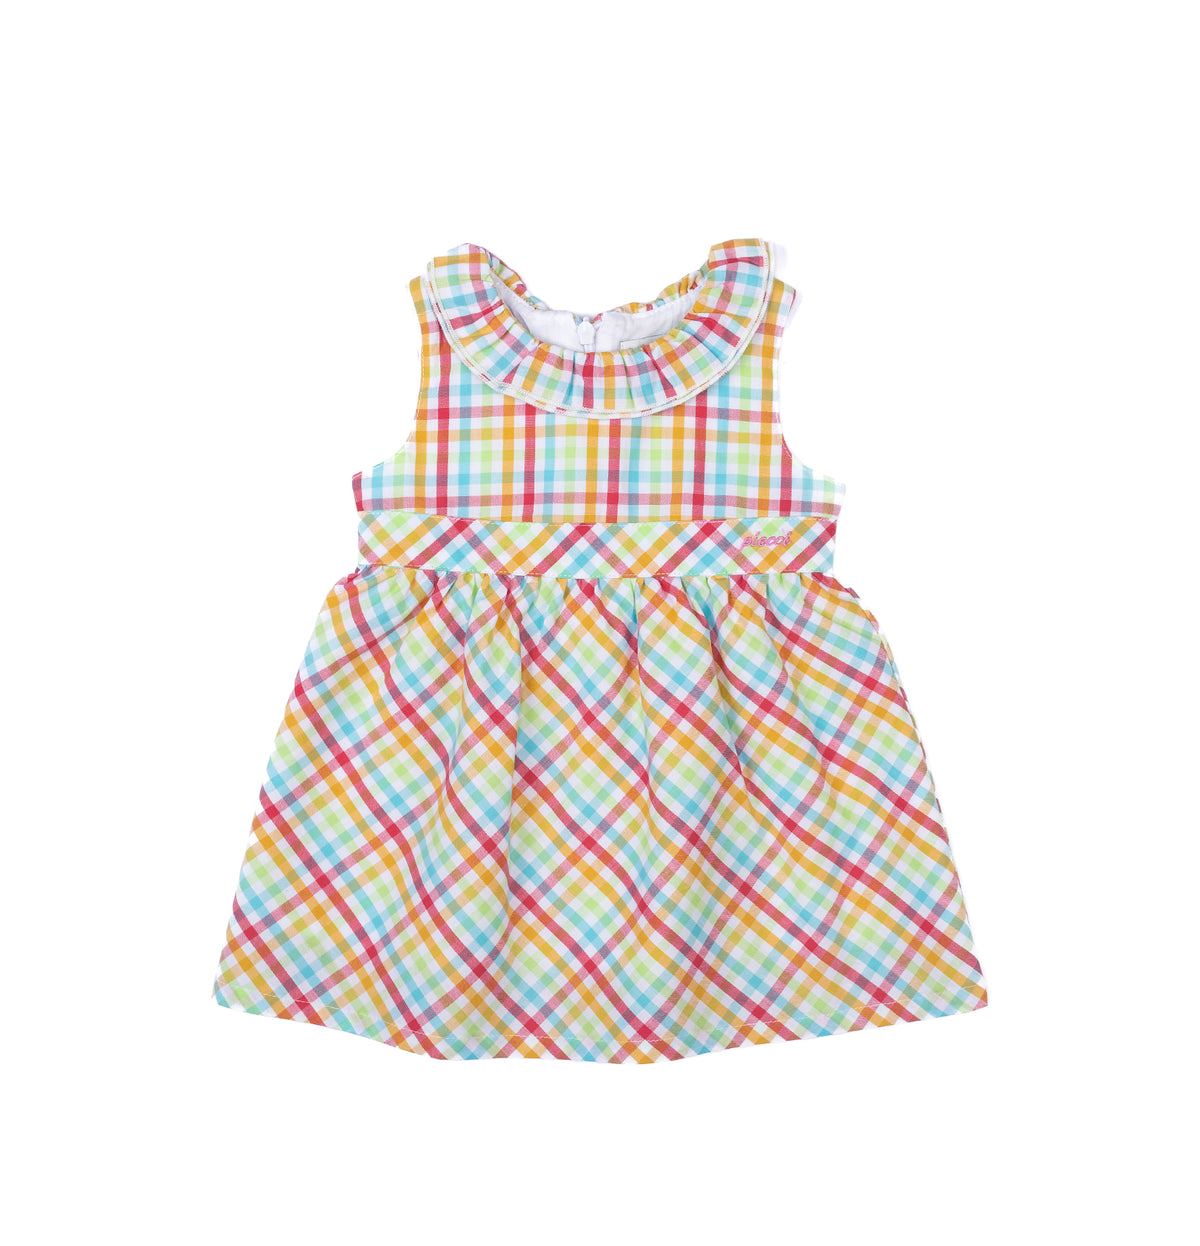 Baby girl colorful cute dress by Pompelo